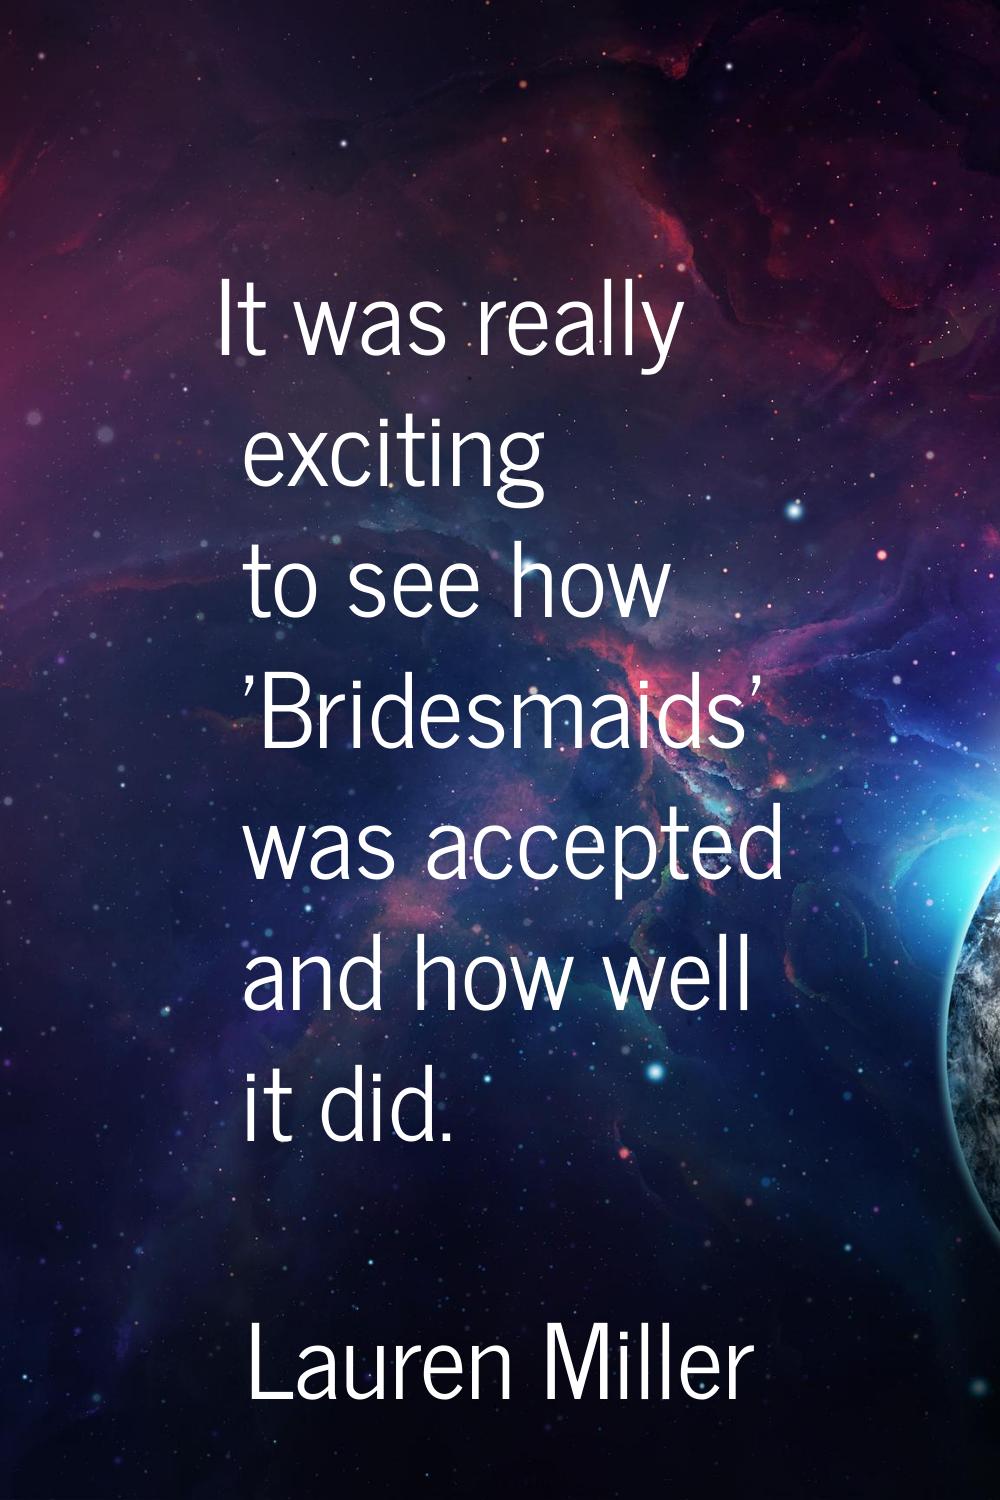 It was really exciting to see how 'Bridesmaids' was accepted and how well it did.